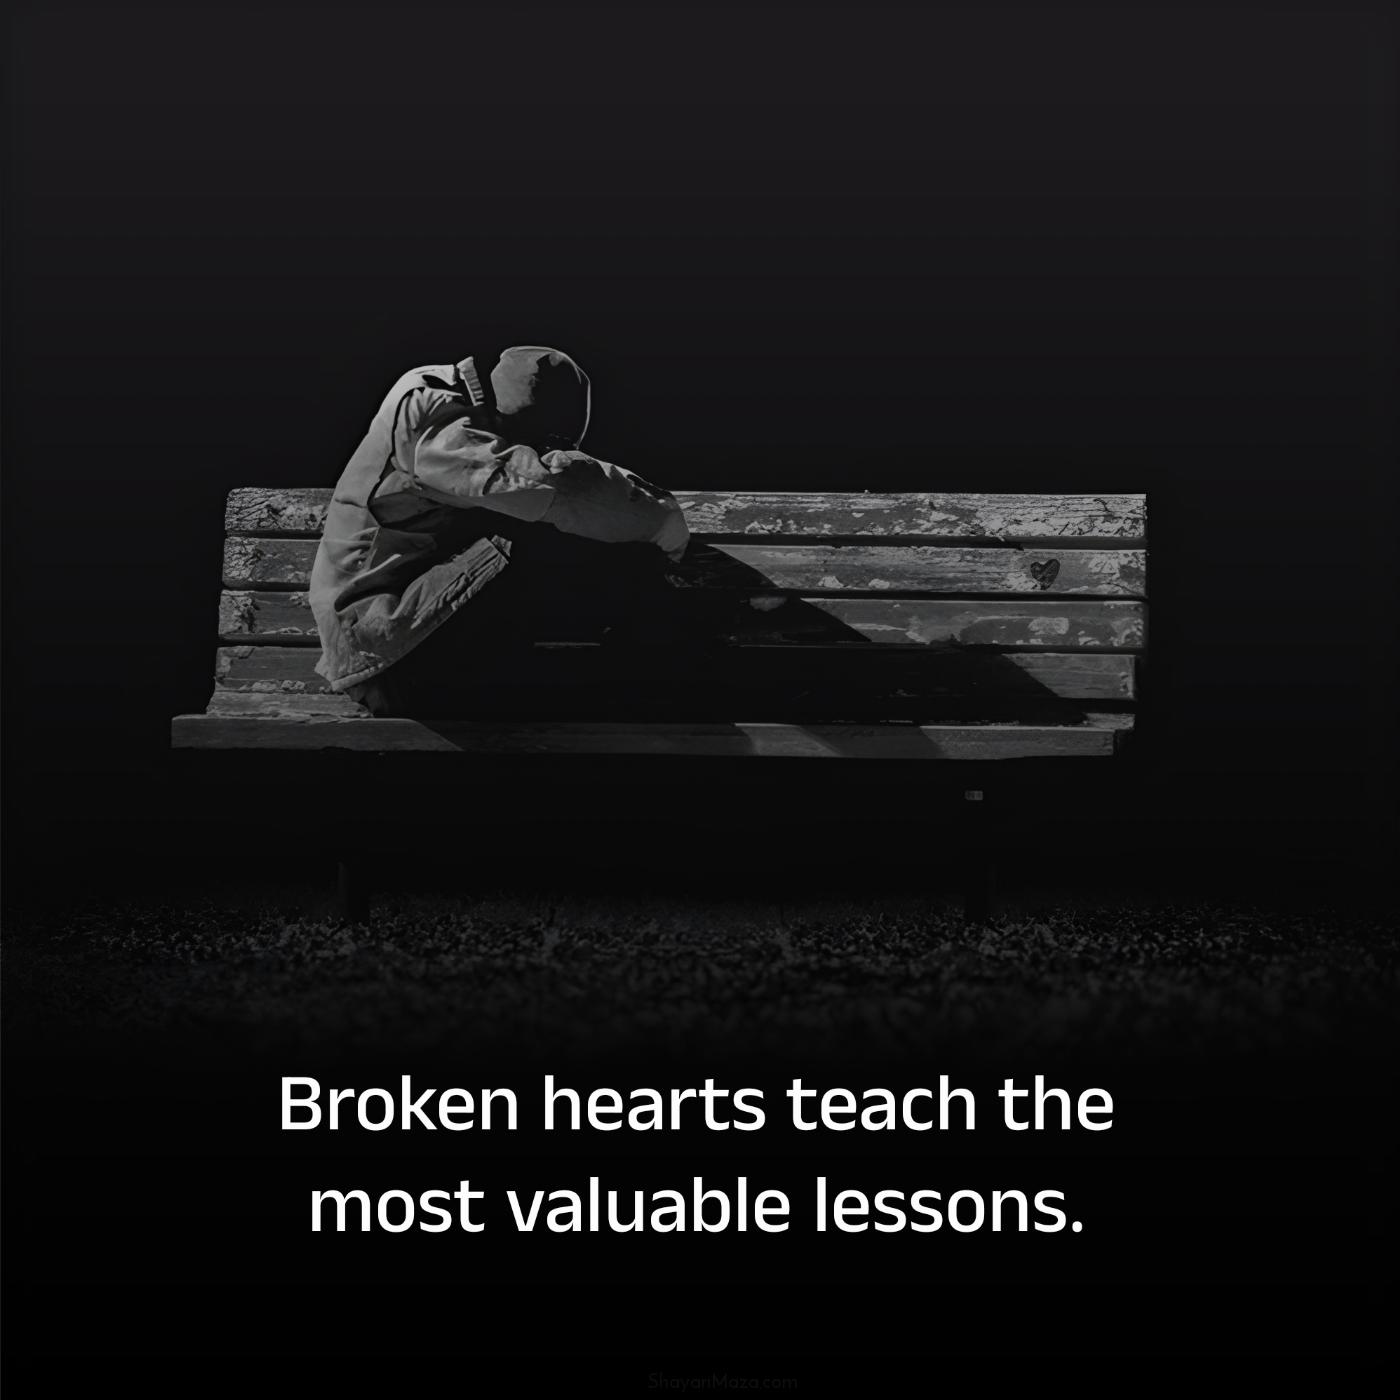 Broken hearts teach the most valuable lessons